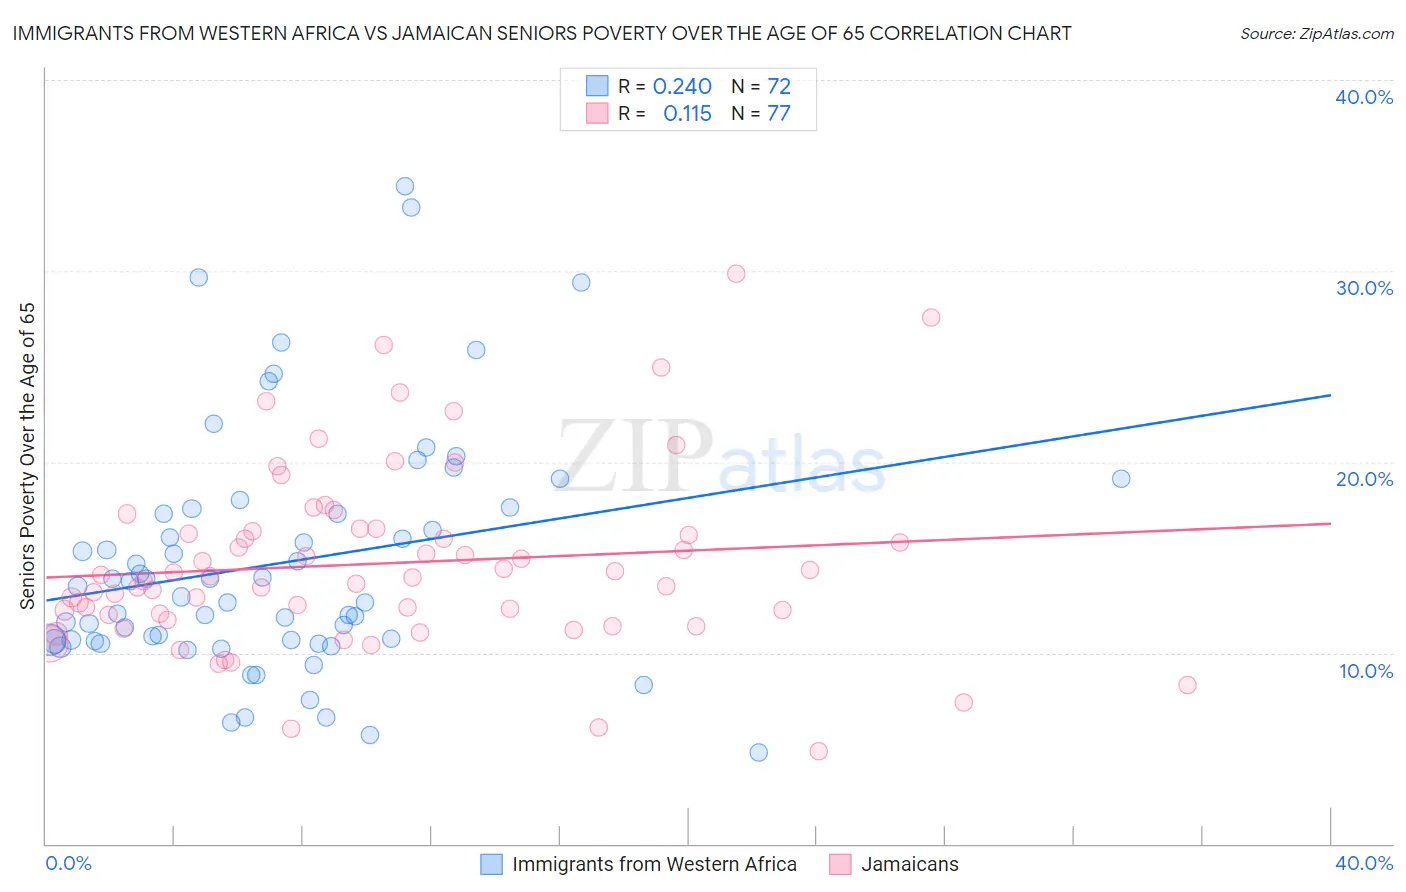 Immigrants from Western Africa vs Jamaican Seniors Poverty Over the Age of 65